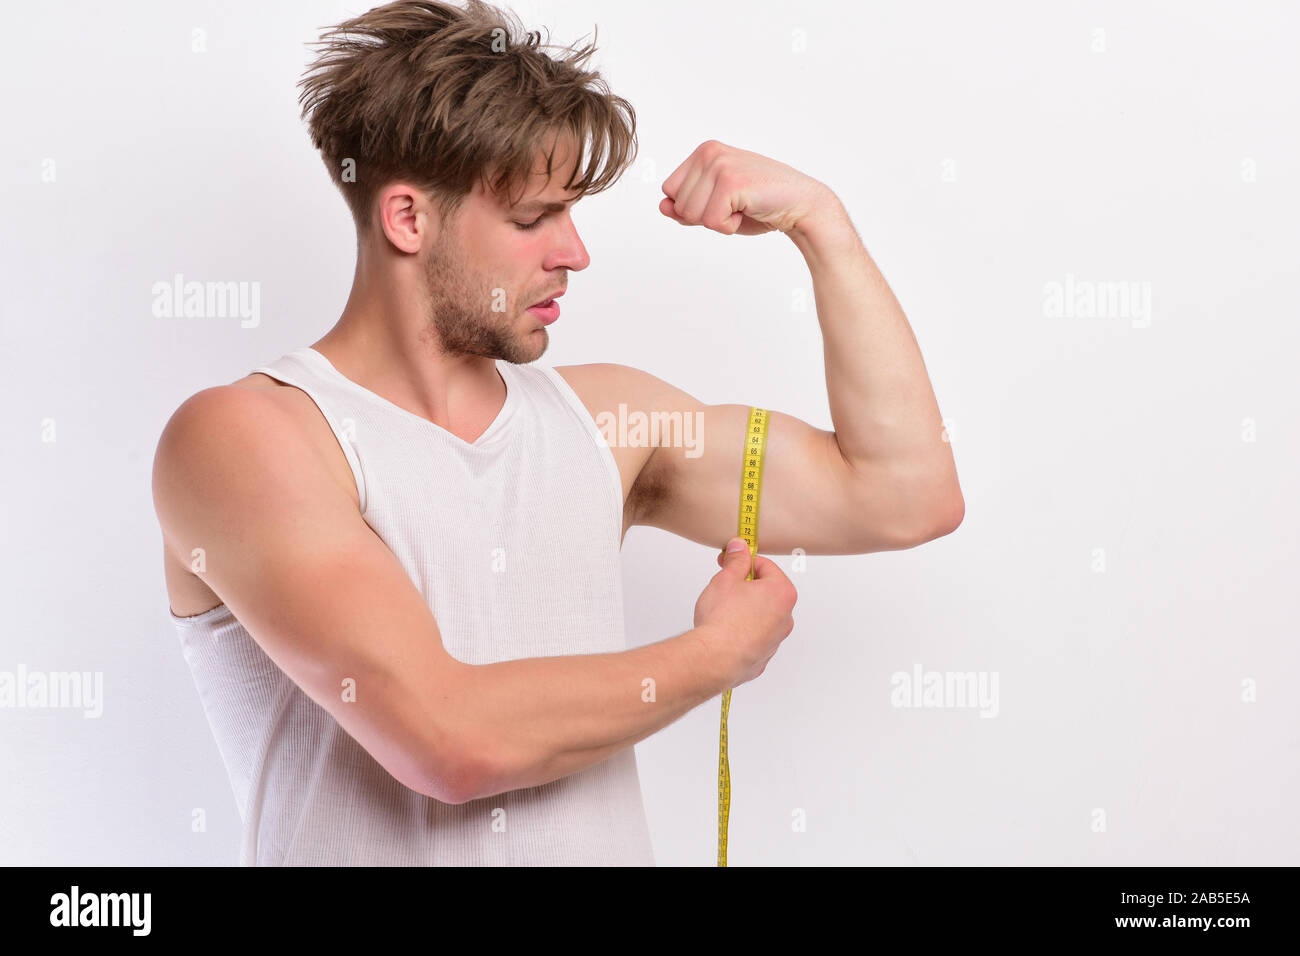 Happy Muscular Man Measuring Bicep Stock Photo by ©AndreyPopov 97125074